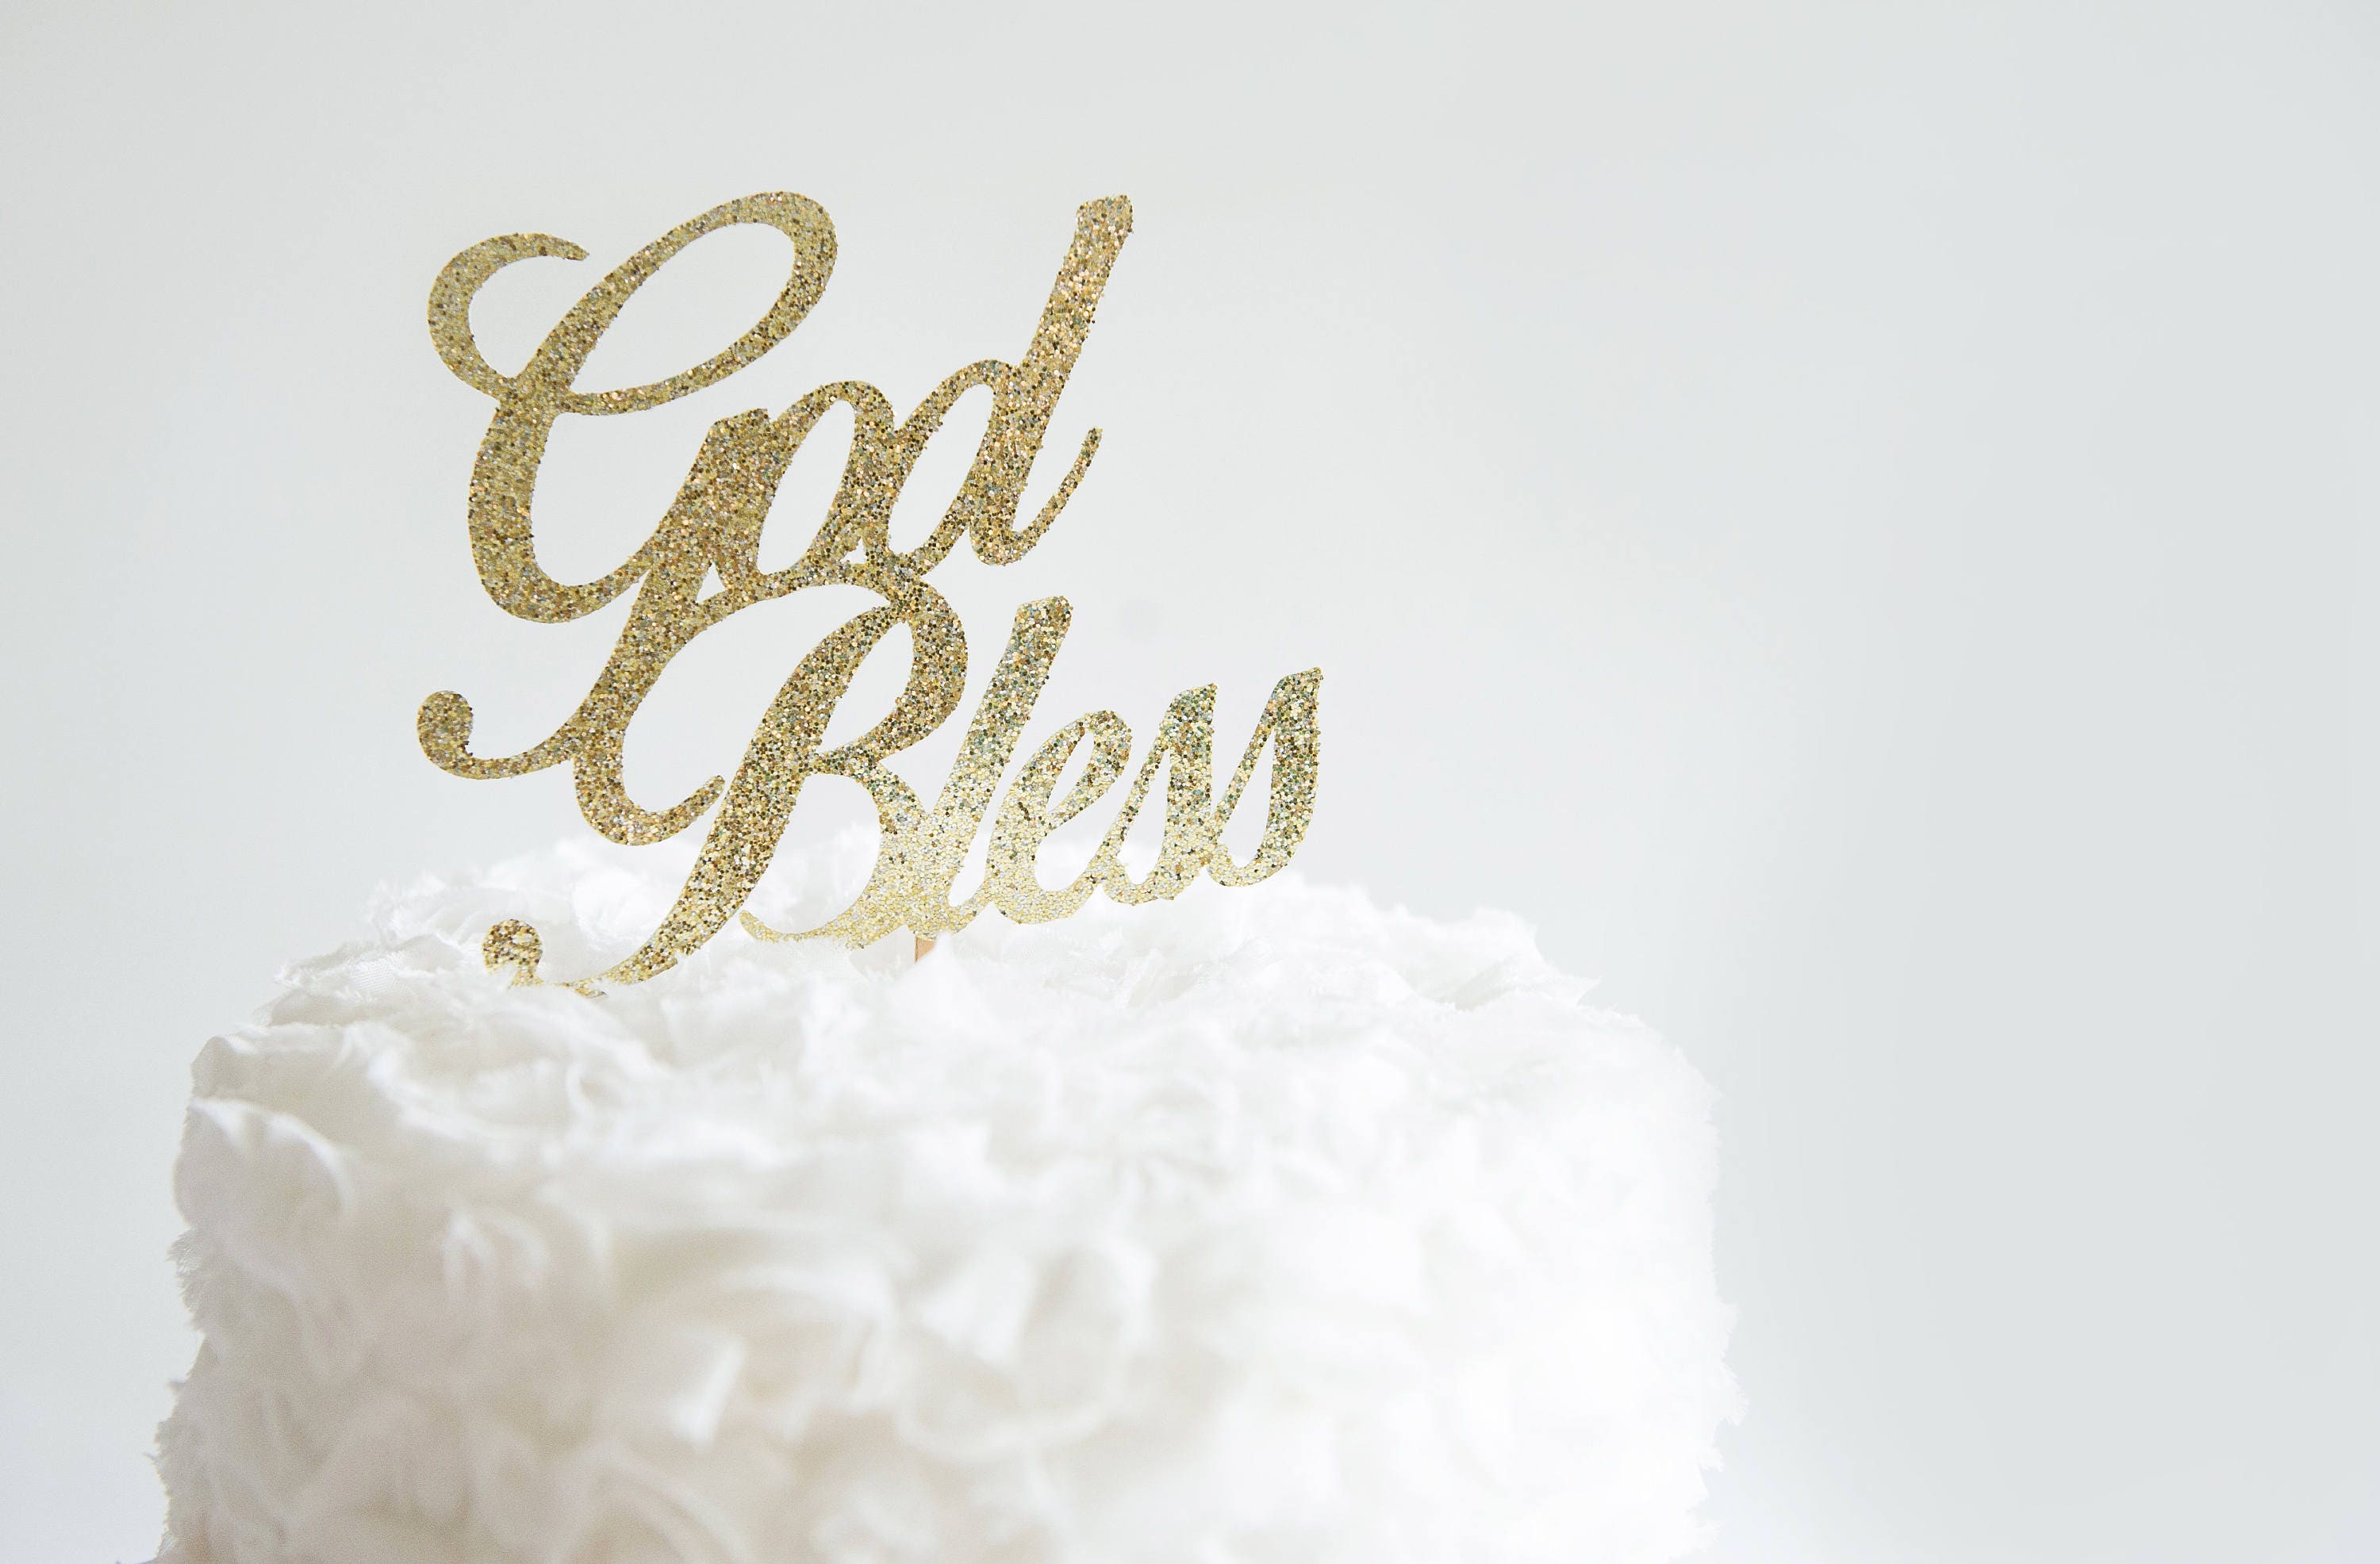 First Communion Baby Shower Christening God Bless This Child Cake Topper for Baptism A Child of God Cake party Decorations Gold Glitter 